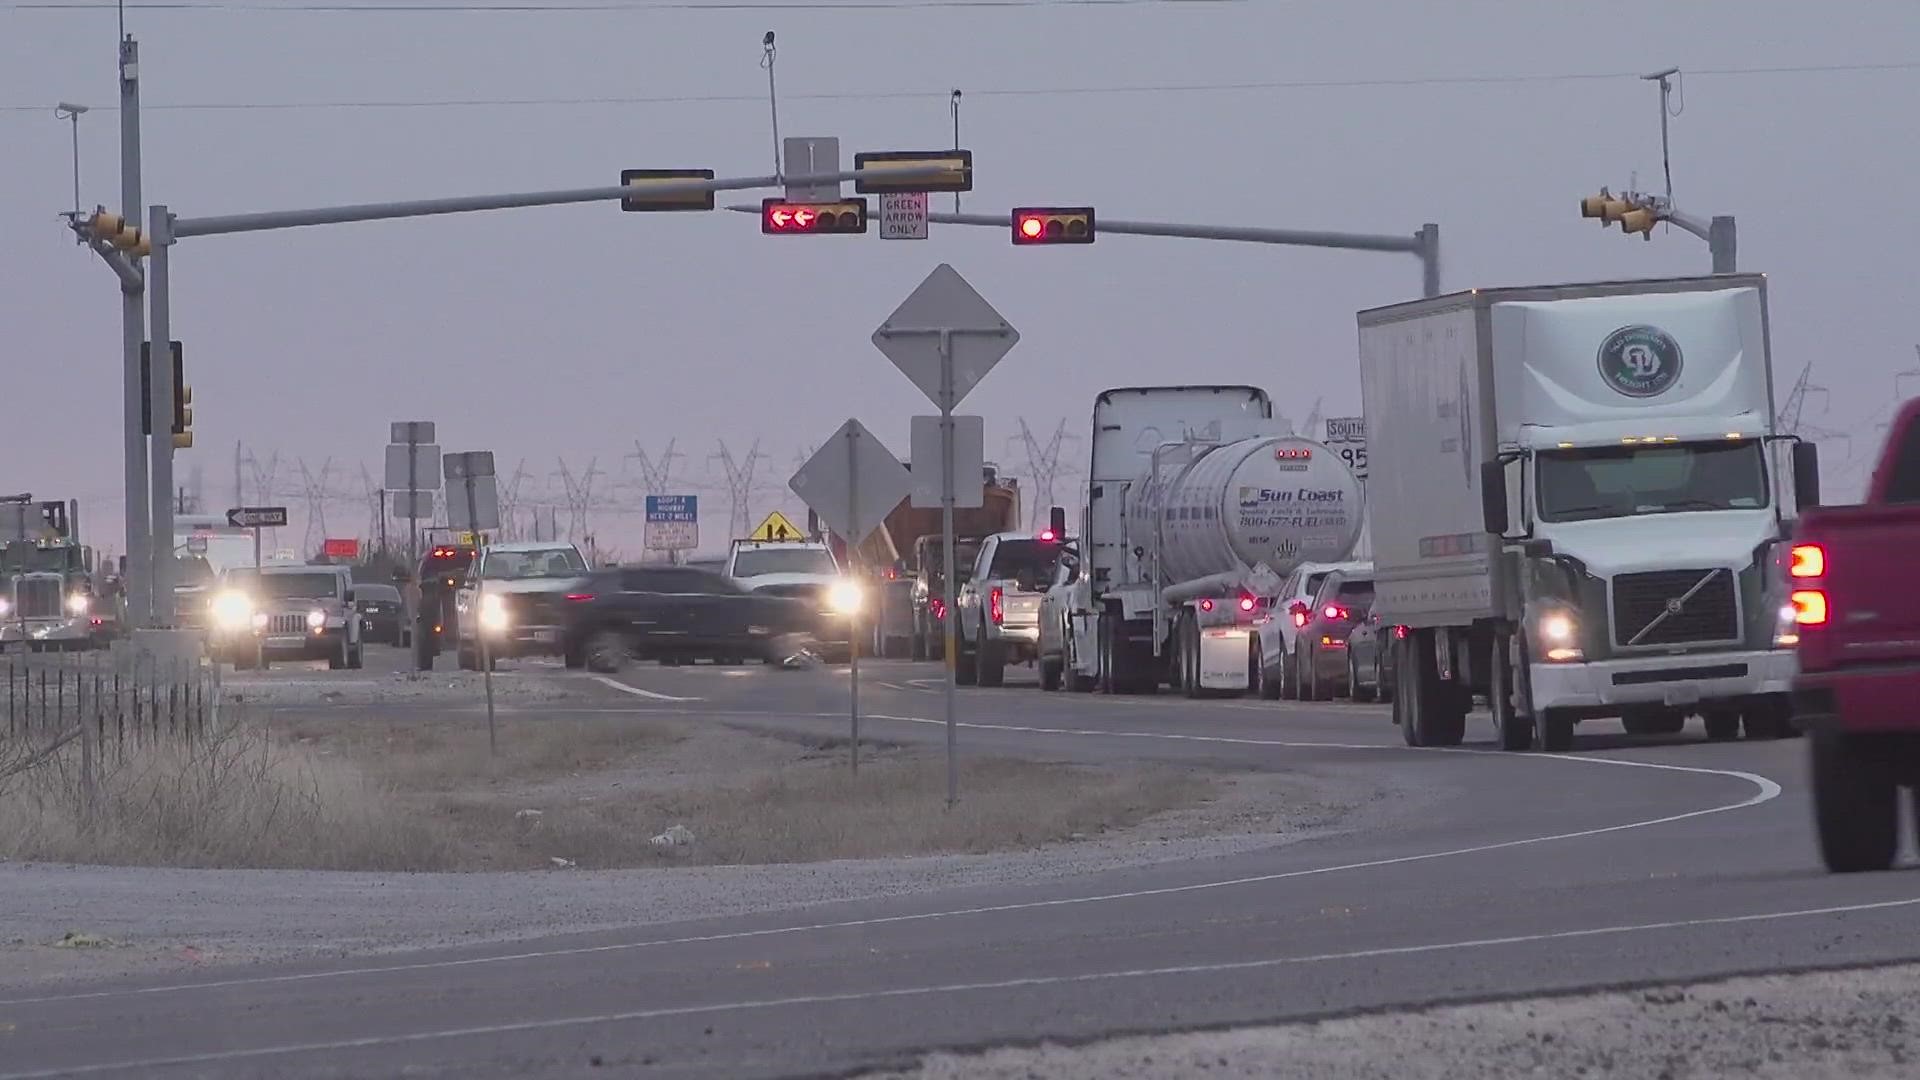 The addition will create a freeway design similar to Loop 250 in Midland, creating a safer and more efficient roadway.